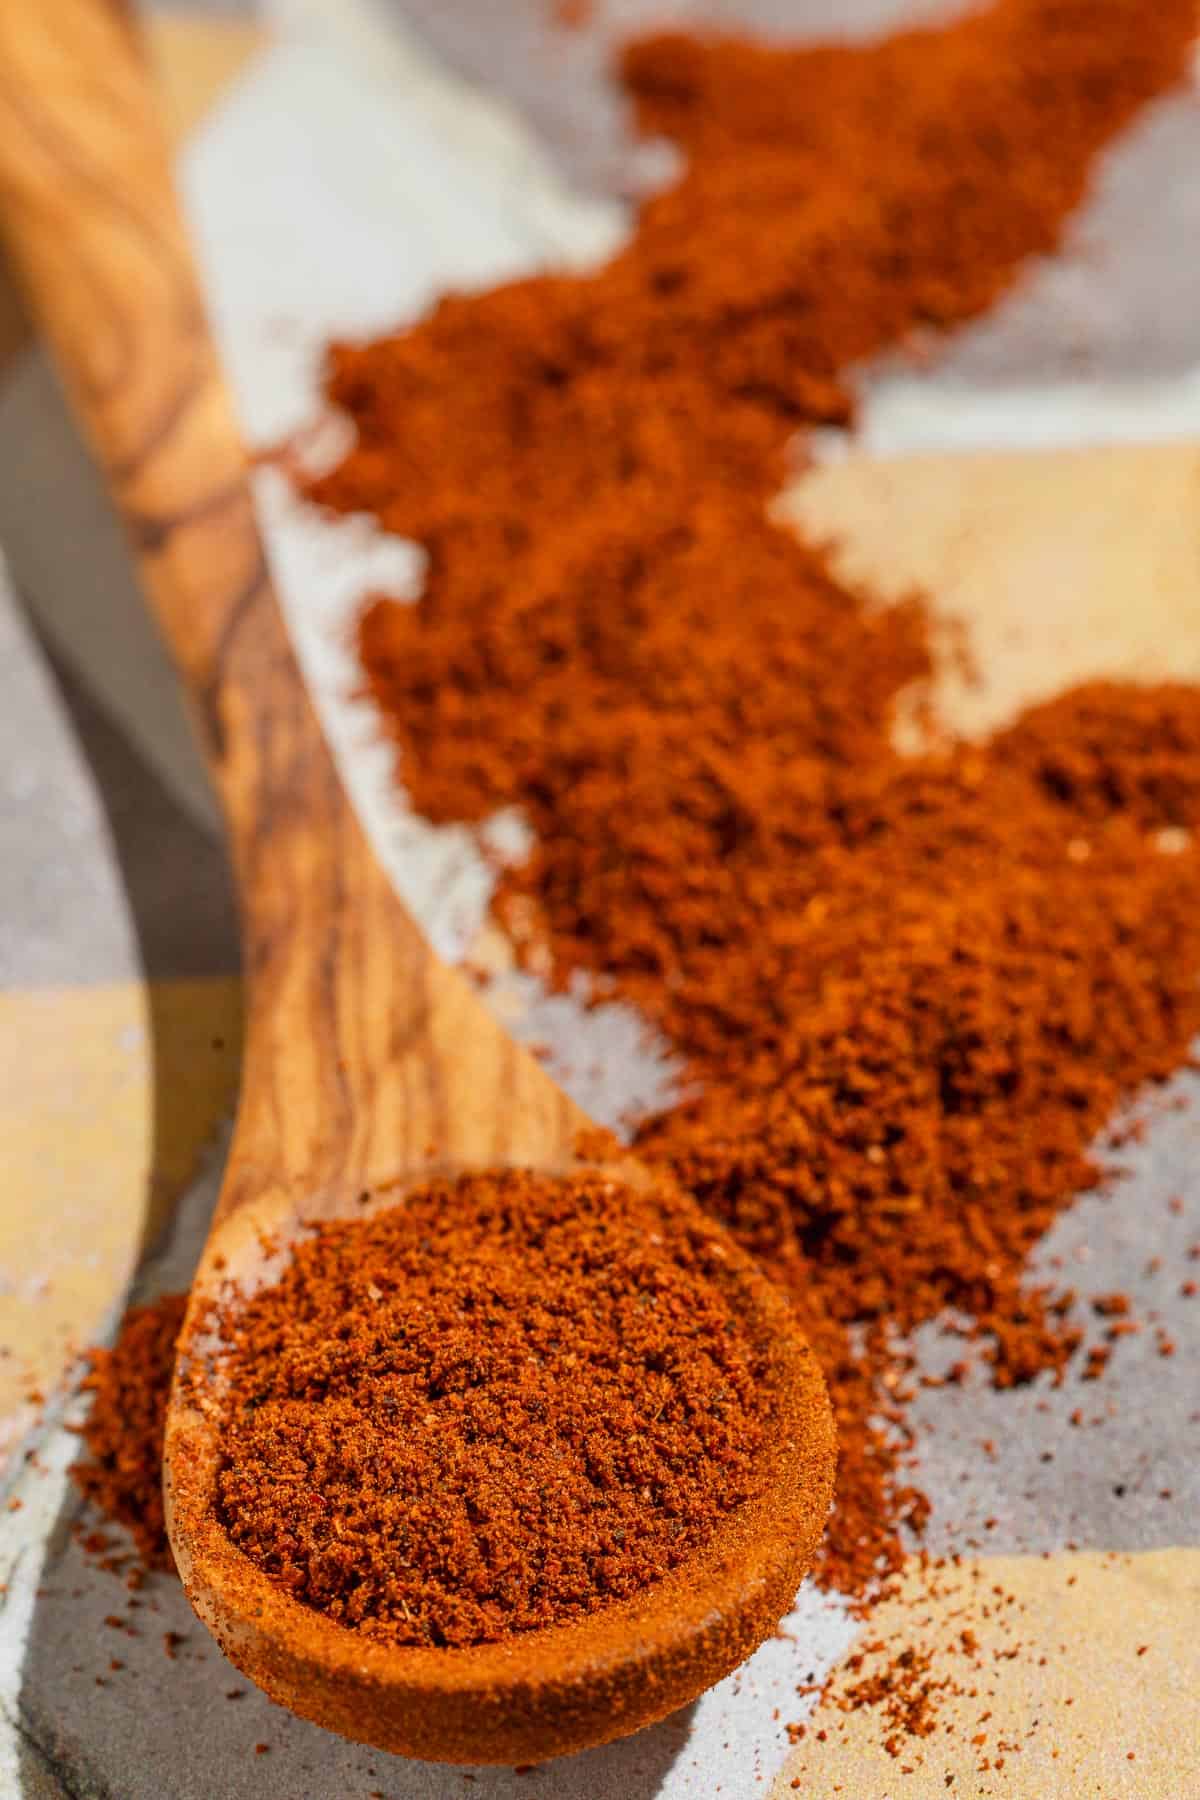 Baharat spice blend on a small wooden spoon next to more of the spice sprinkled around it.